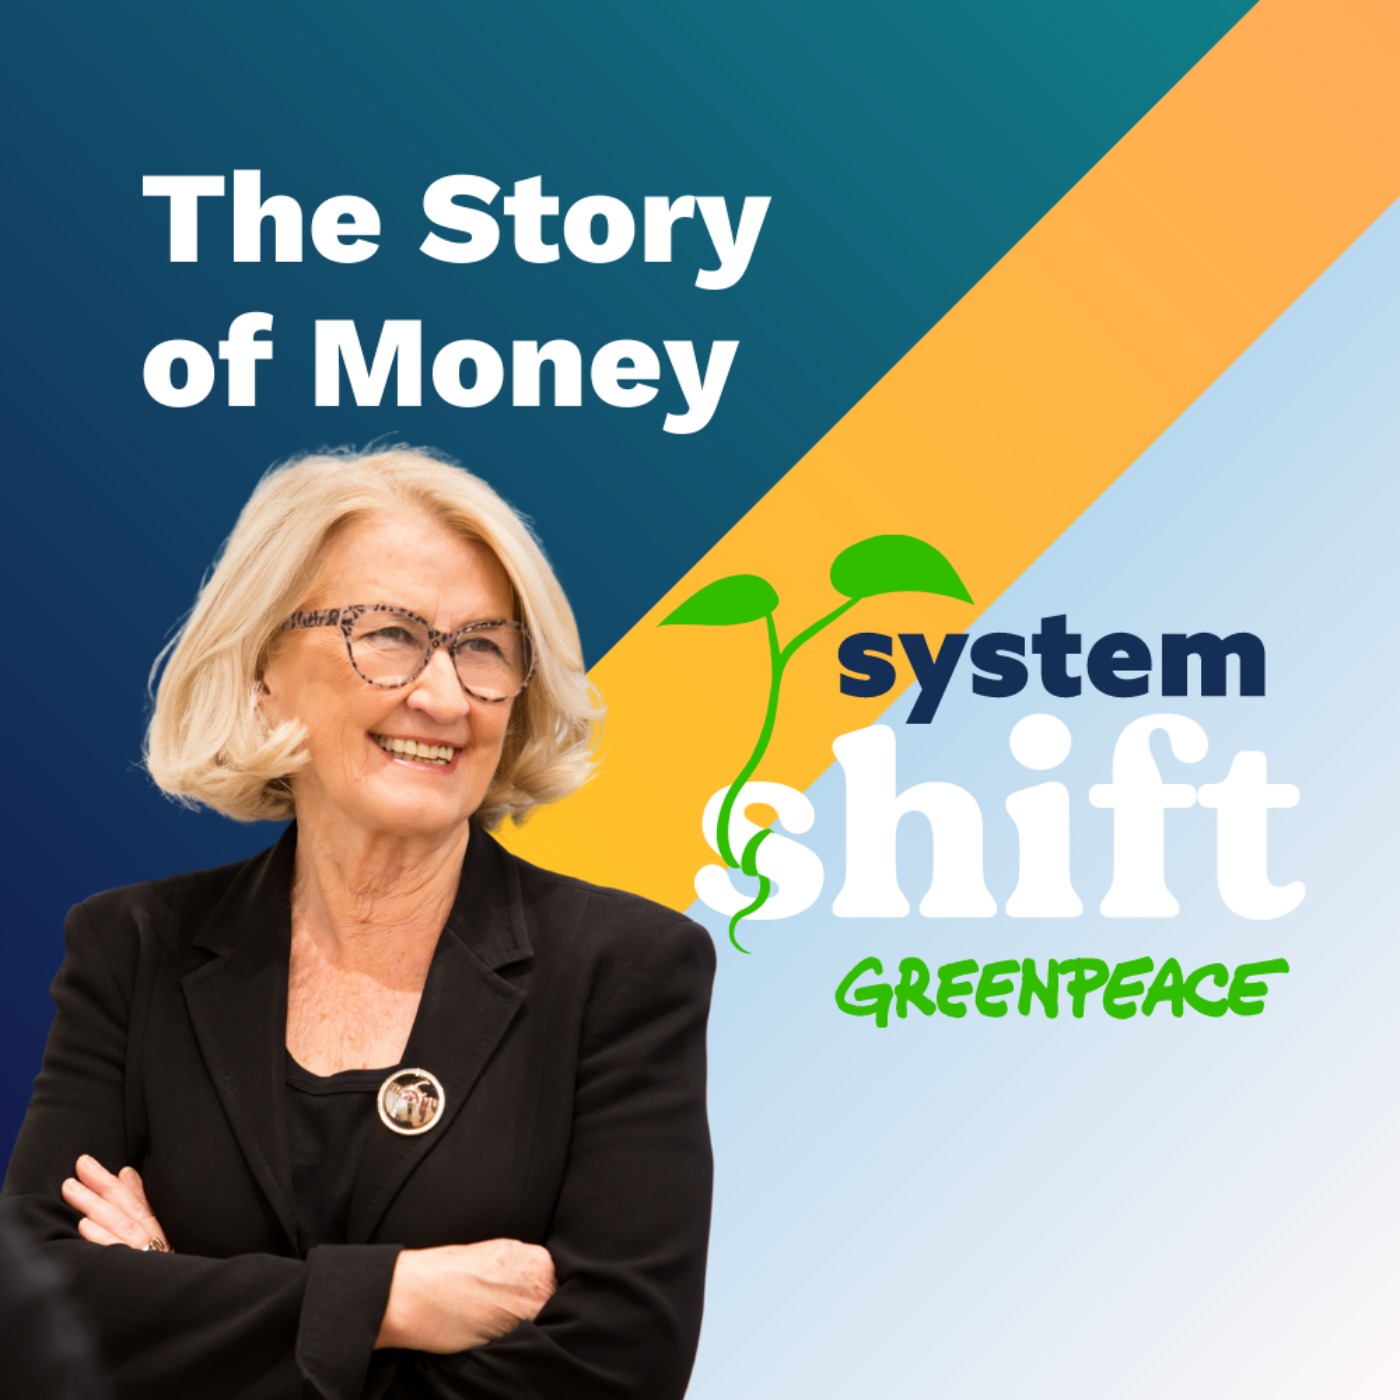 Ann Pettifor: The Story of Money